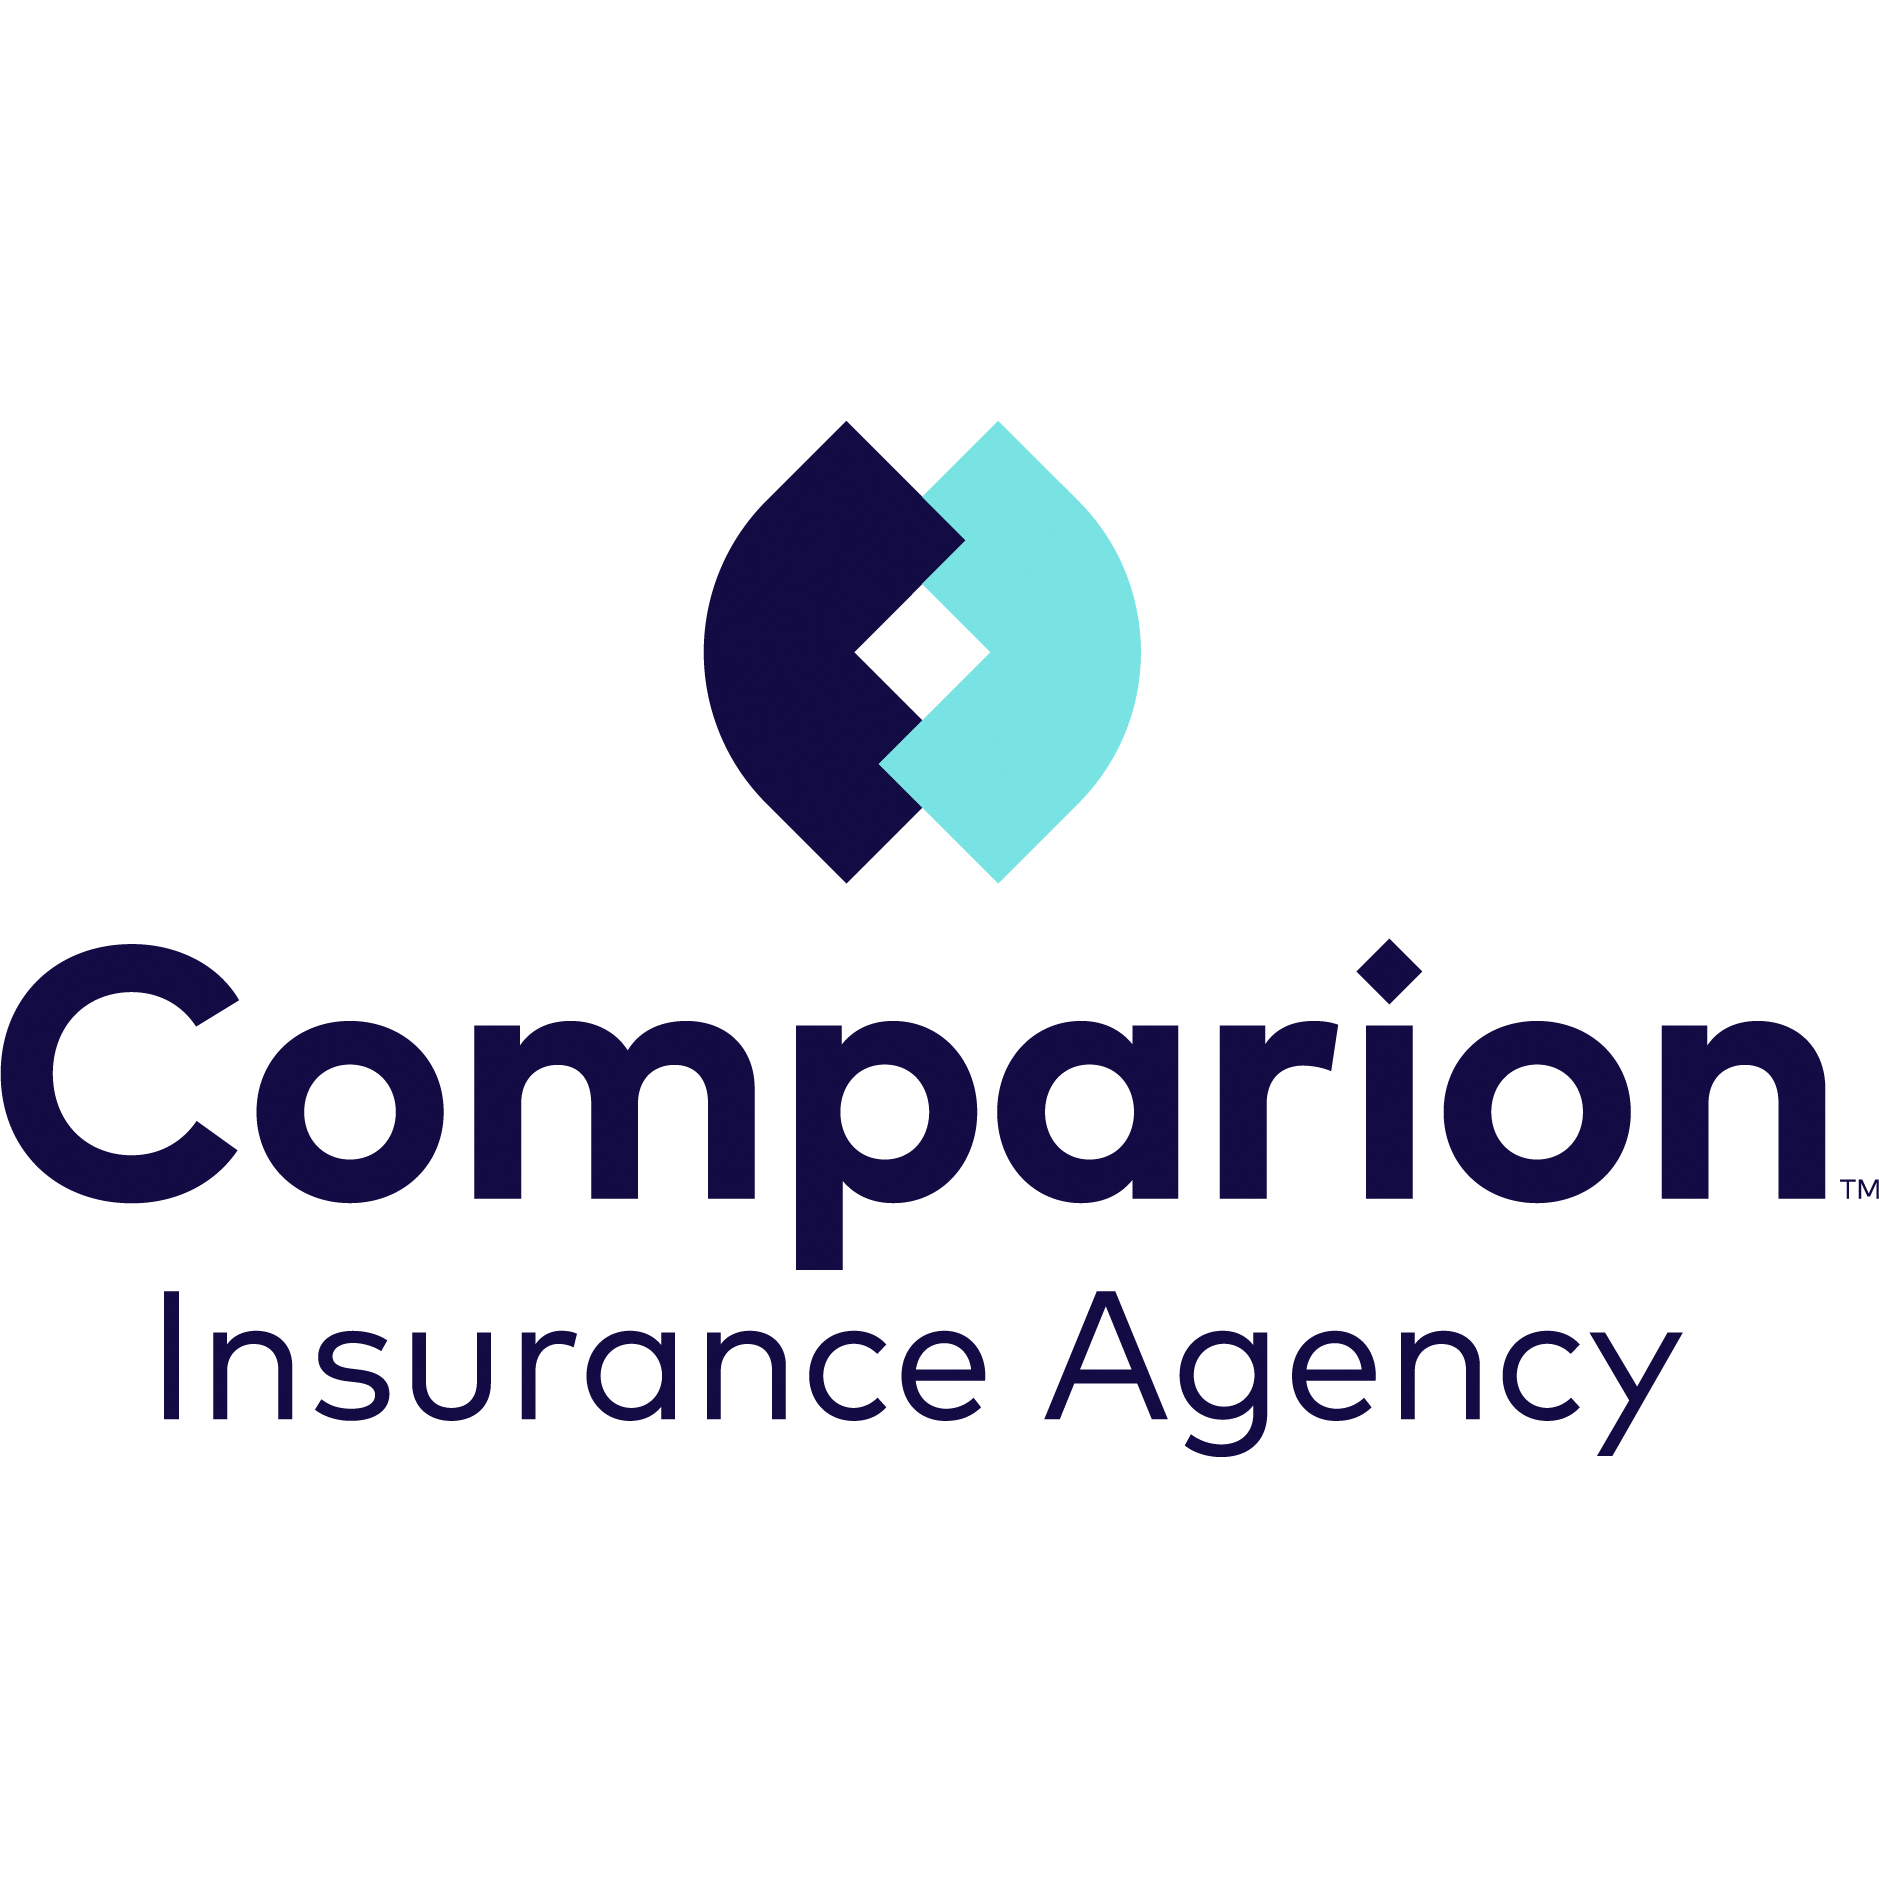 Kimberly Horner at Comparion Insurance Agency